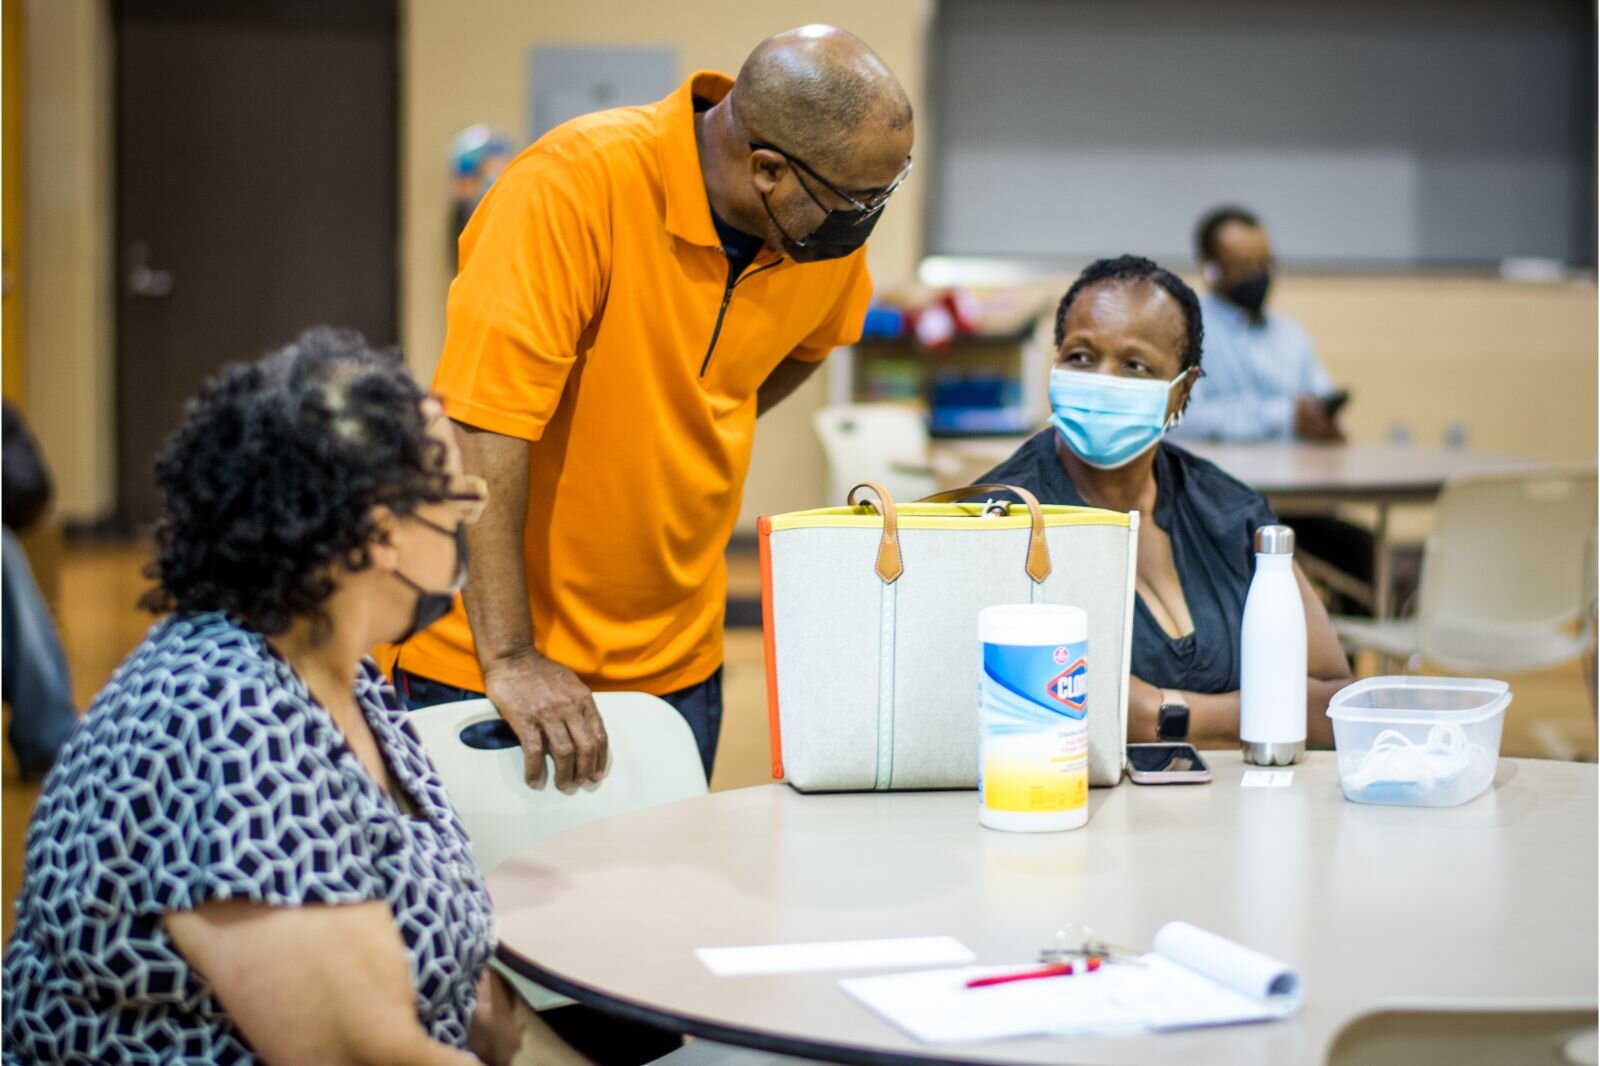 Rev. Addis Moore speaks with Northside residents who visited Mt. Zion Baptist Church on July 21, 2022 to provide input on plans for an affordable senior housing complex.